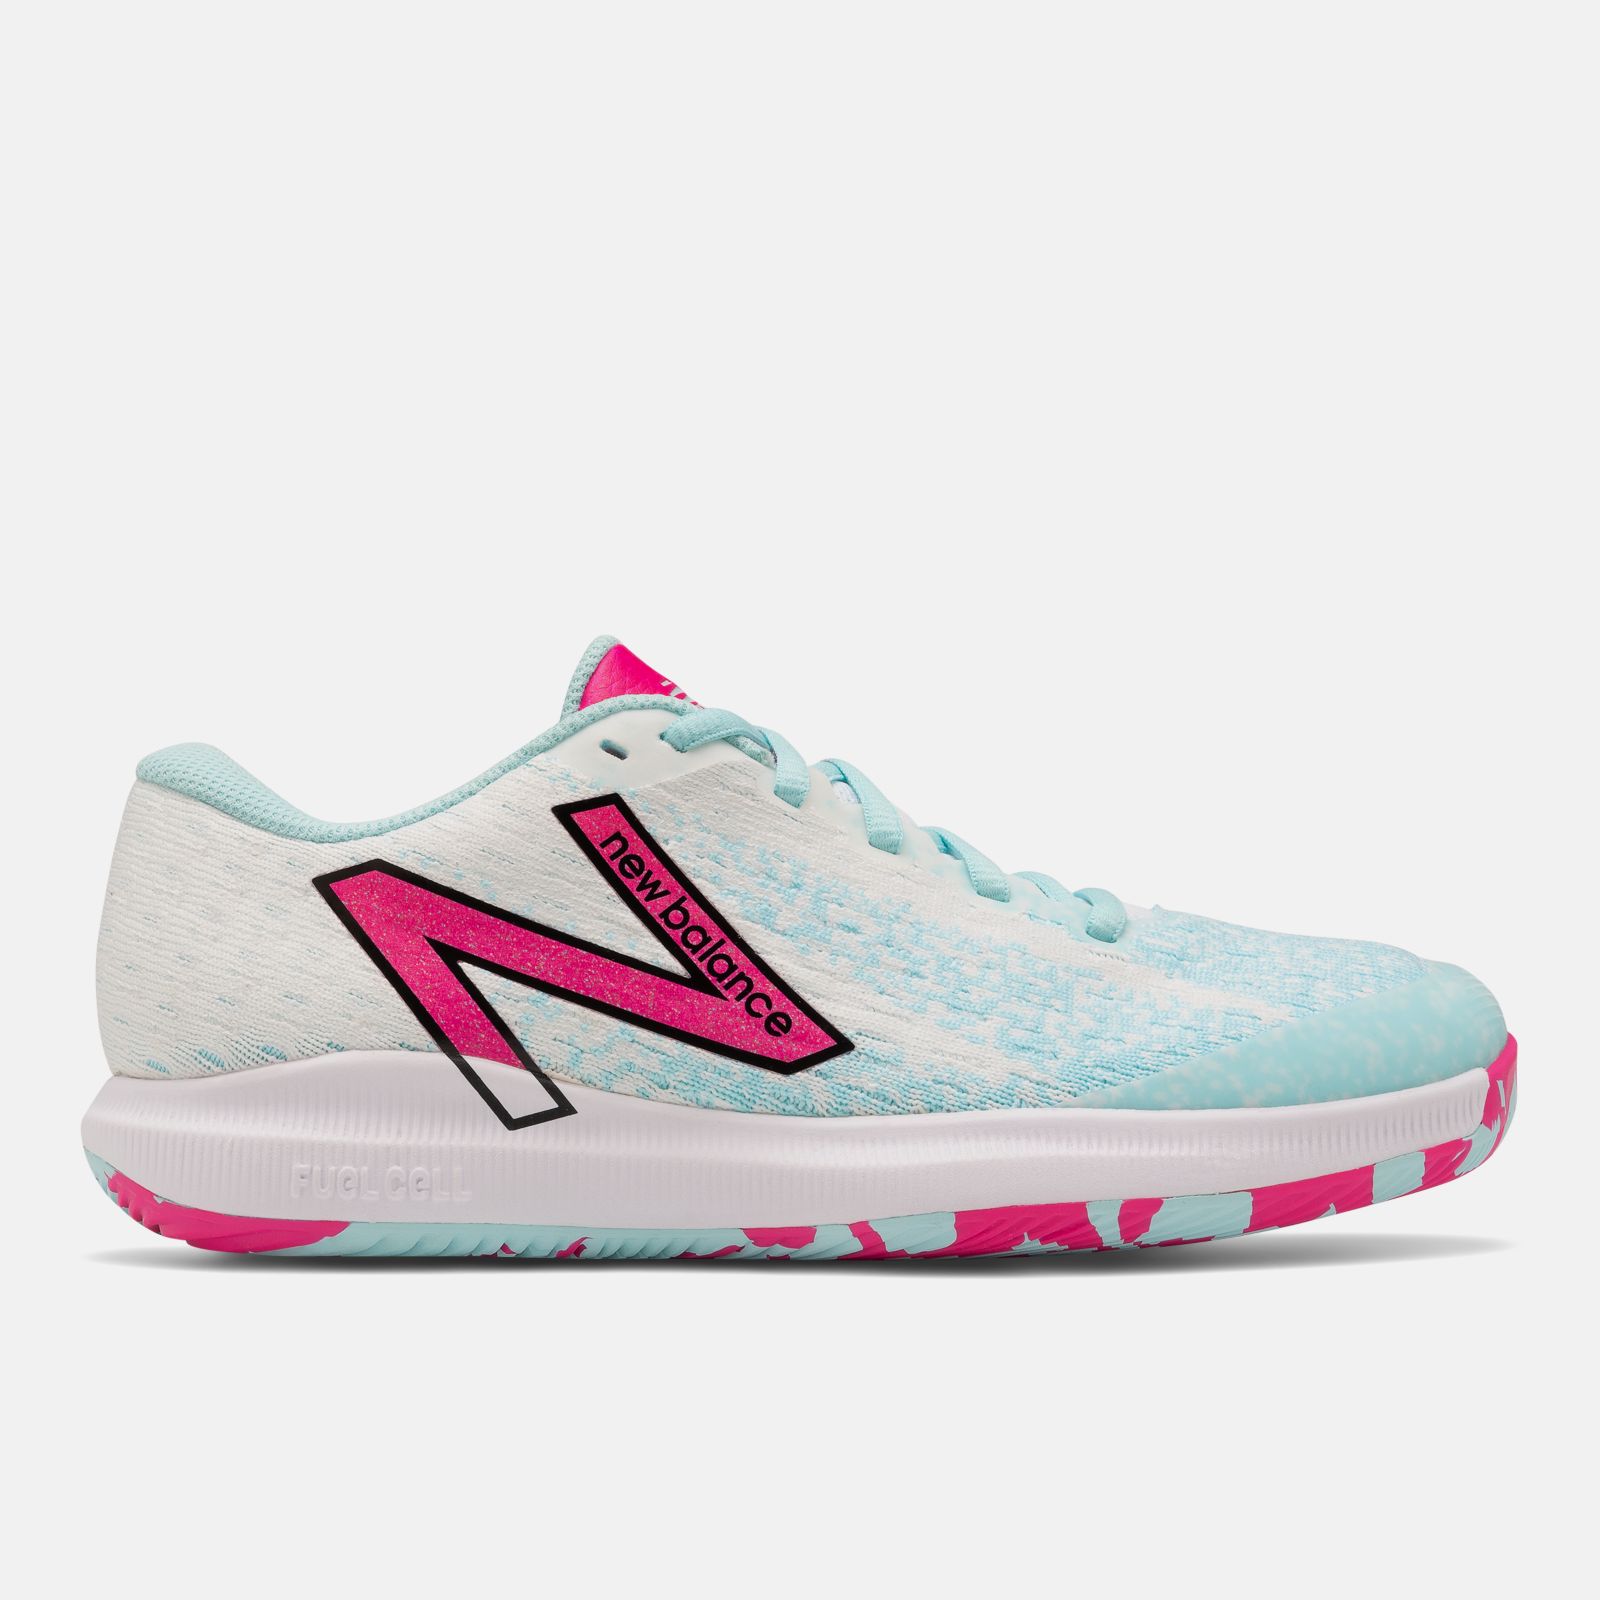 New Balance Women's Fuel Cell low-top sneakers